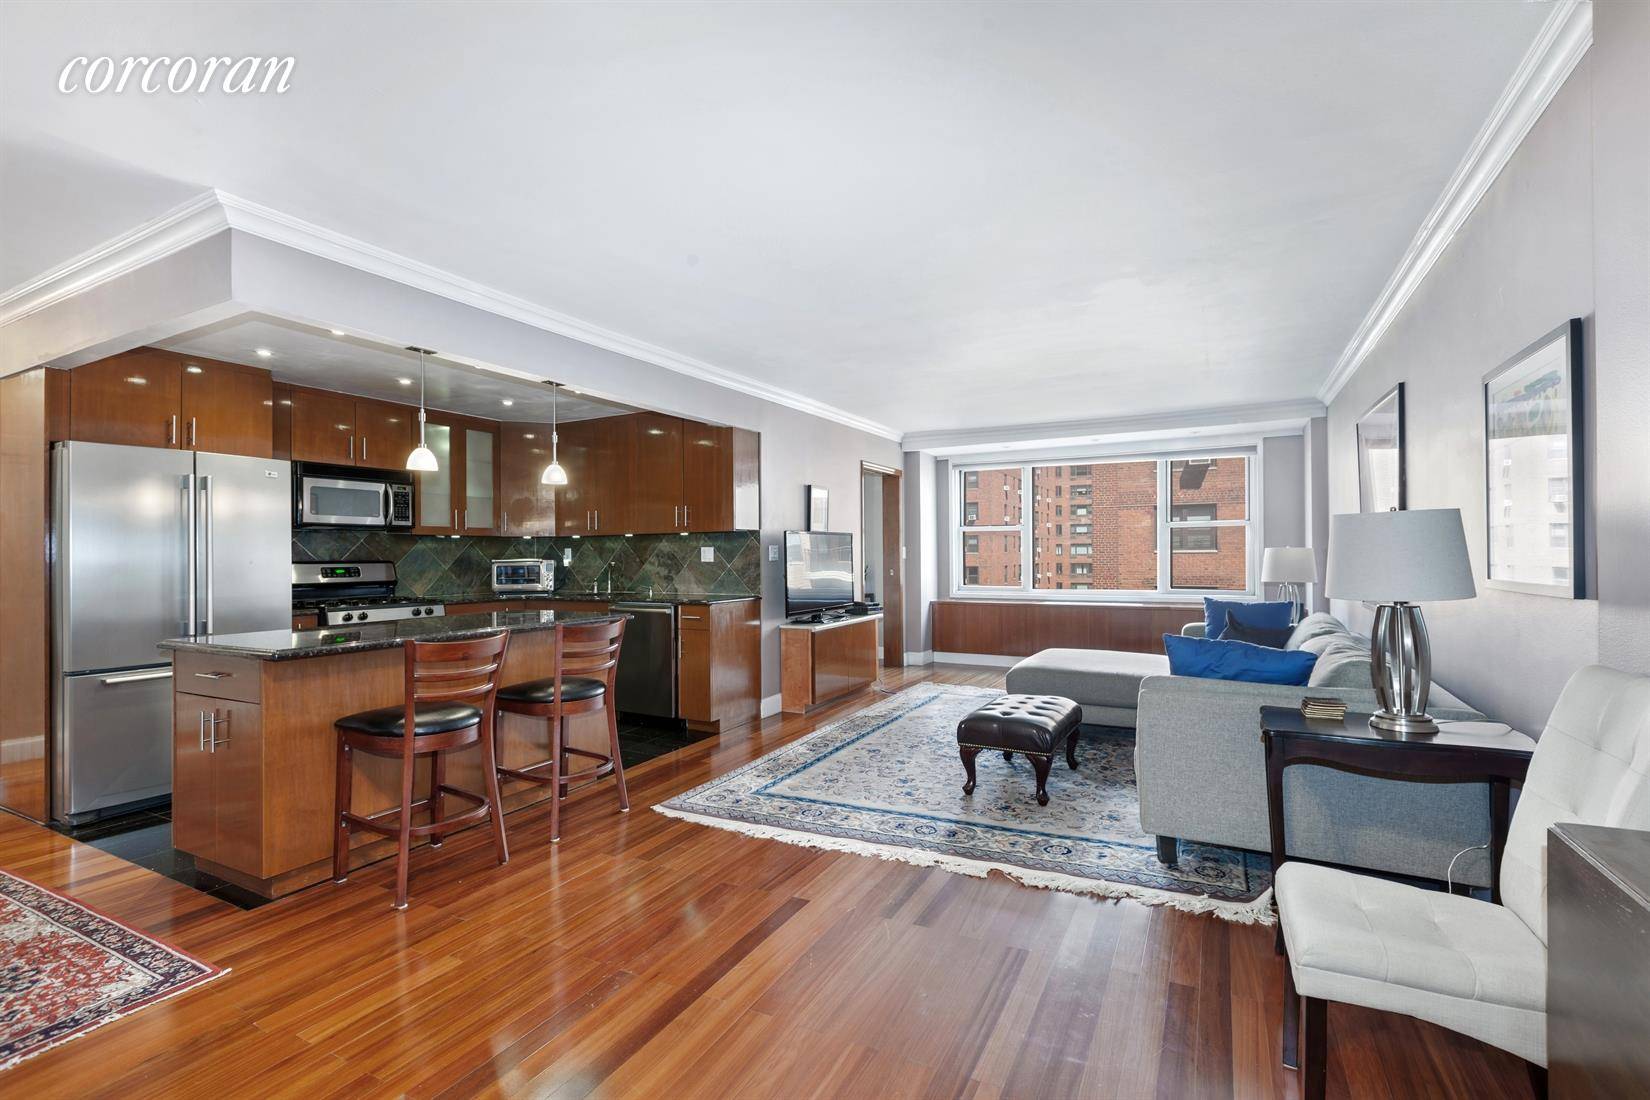 An incredible value at 795, 000 for this renovated 1BR with Home Office, 2 full bath apartment located in The Park Sutton.